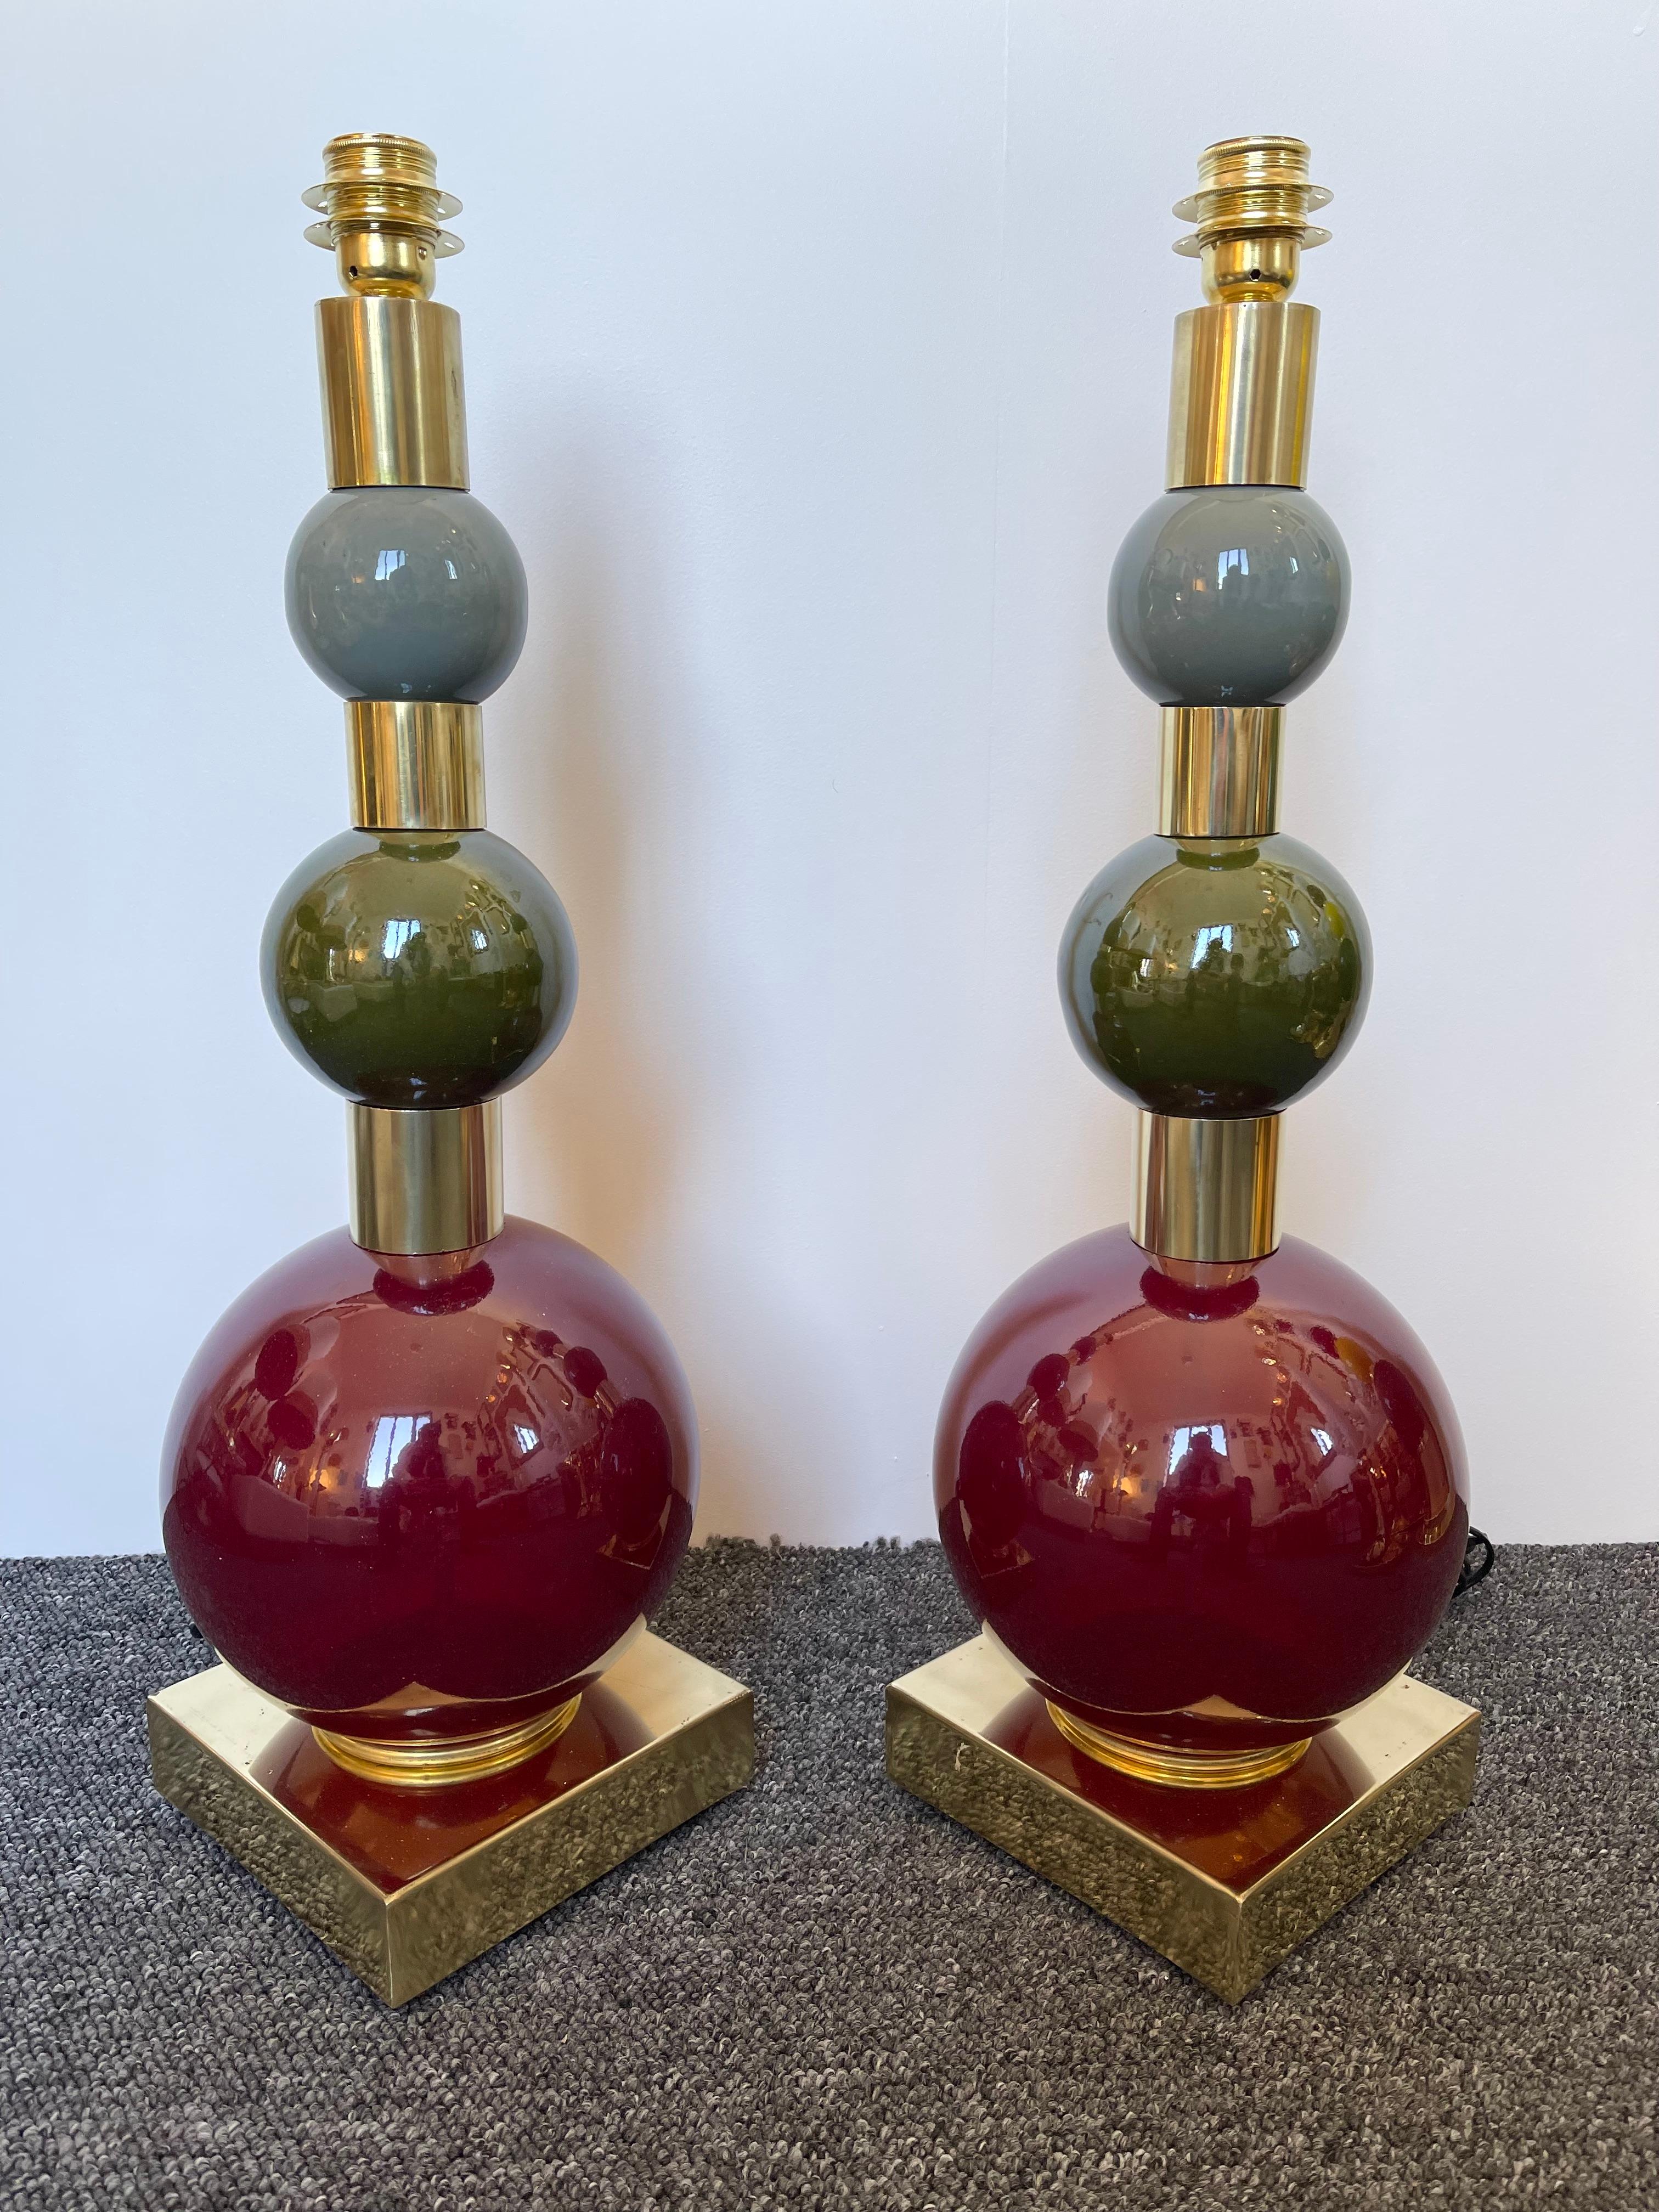 Pair of table or bedside brass lamps red Murano glass and gray and green ceramic terracotta ball. Contemporary work from a small italian artisanal workshop.

Demo shades non included. Measurements in description with demo shades
Measurements lamp